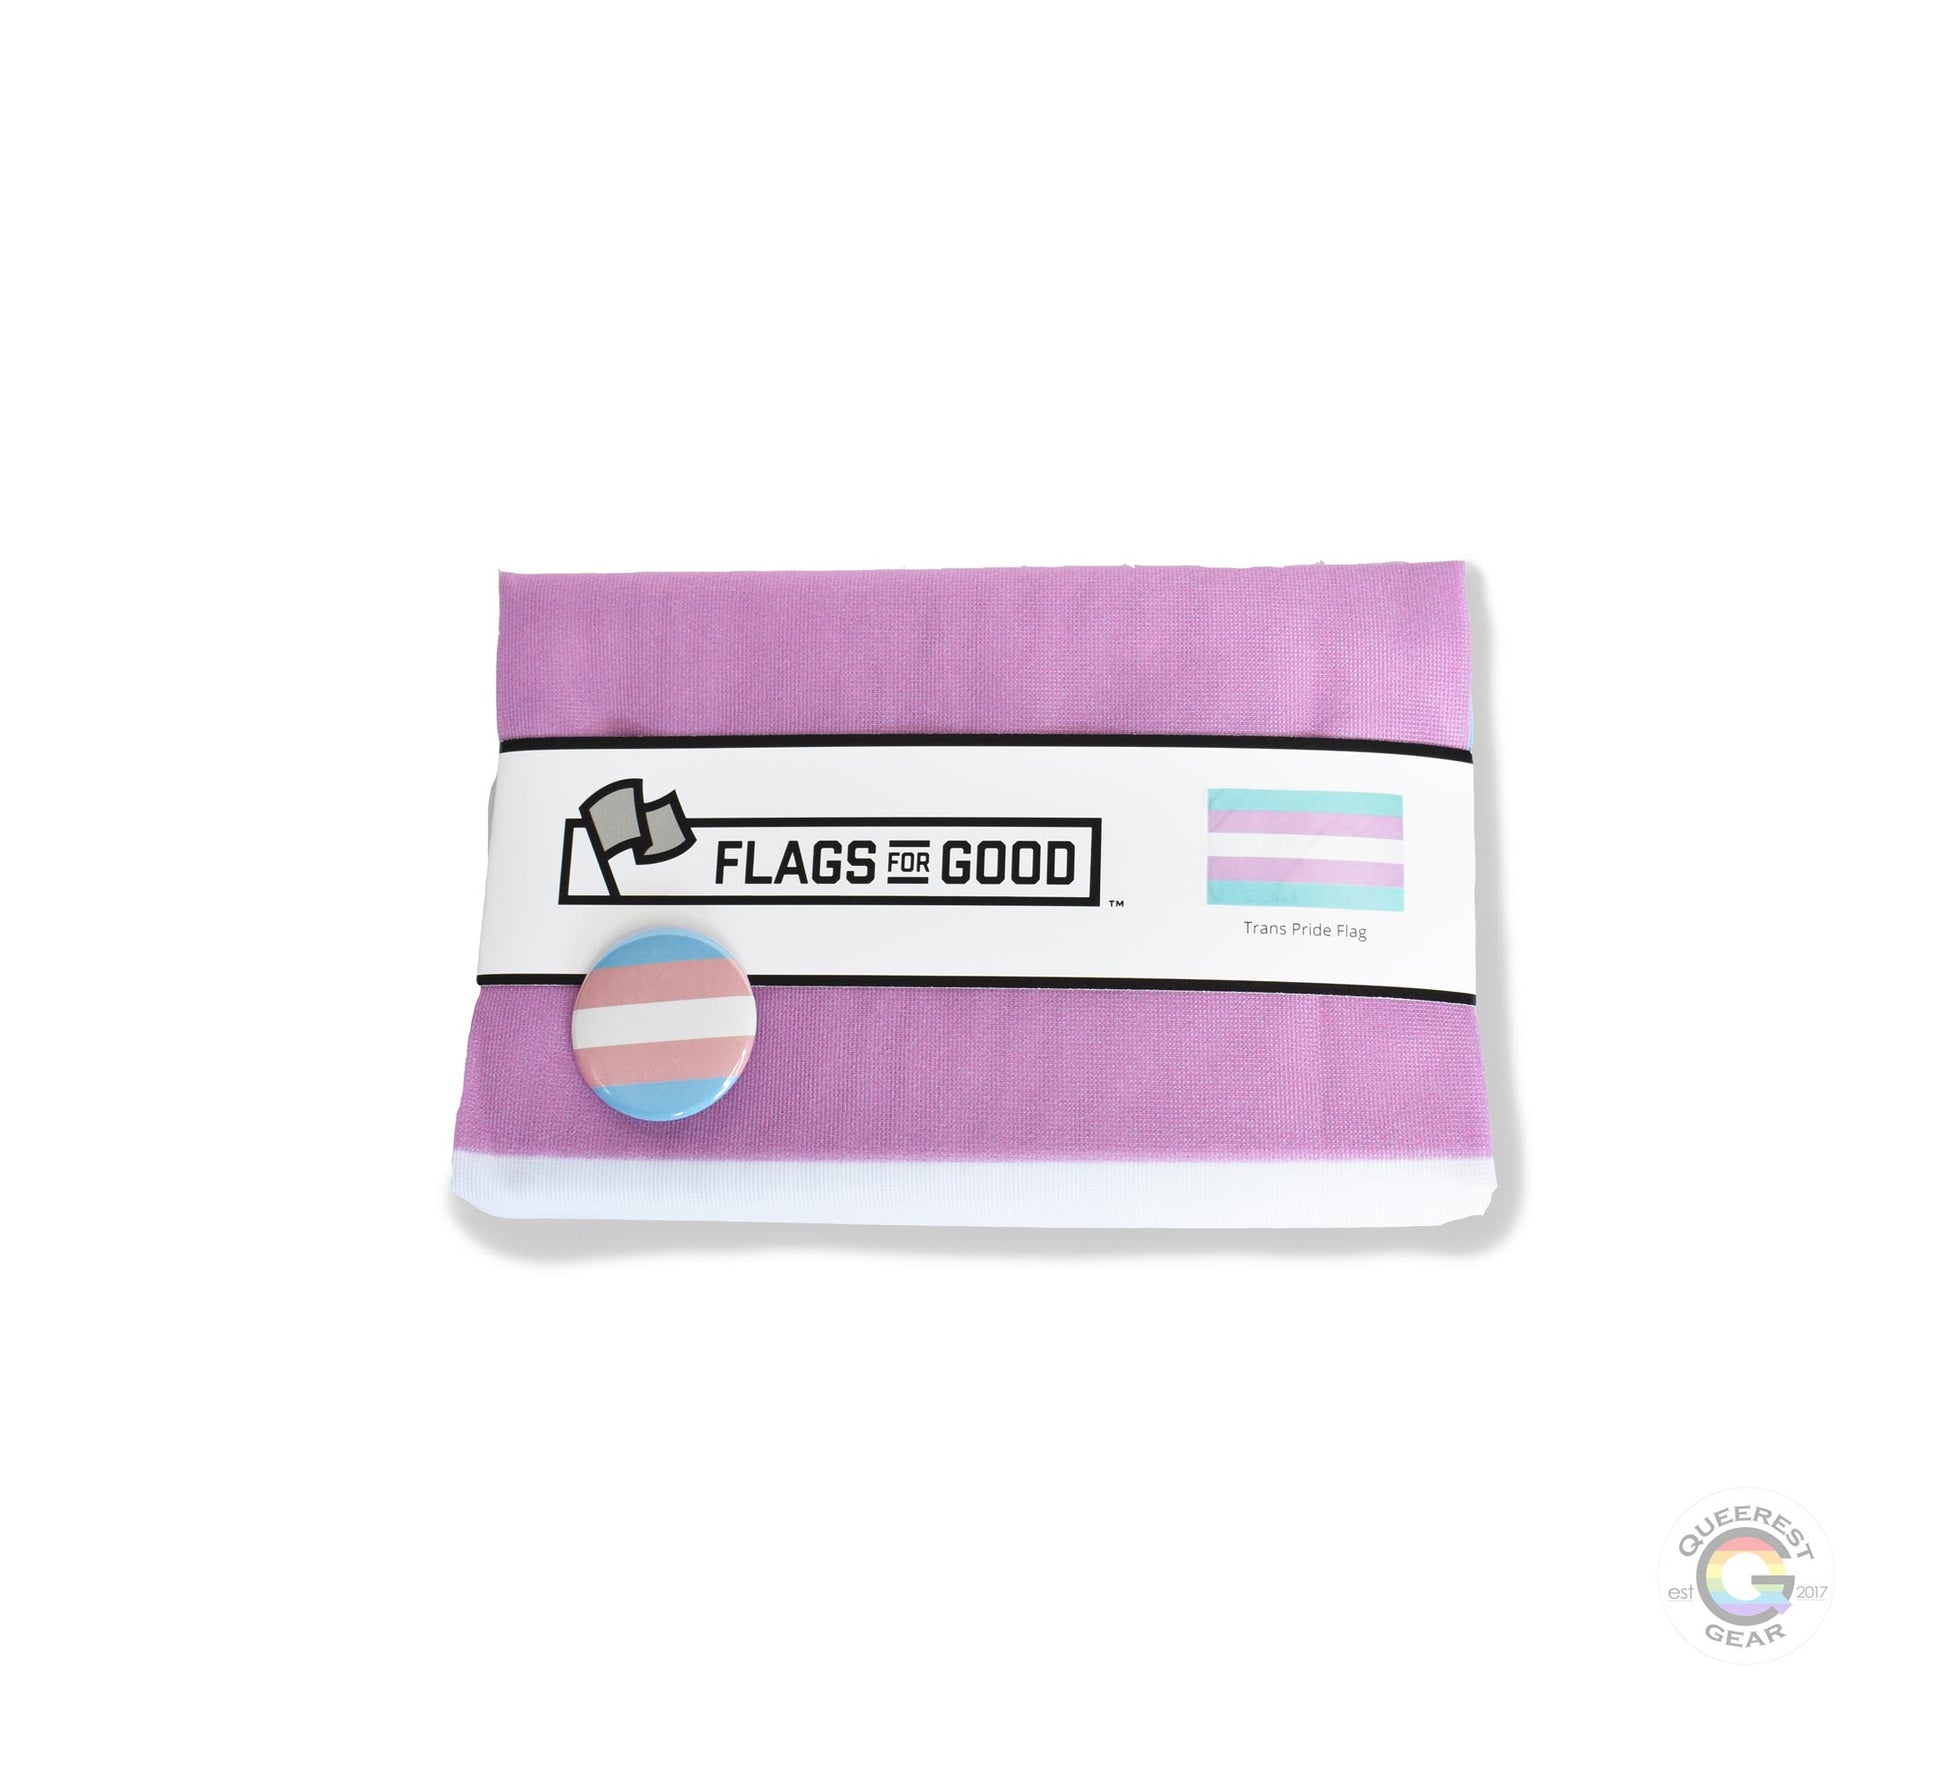  The transgender pride flag folded in its packaging with the matching free transgender flag button